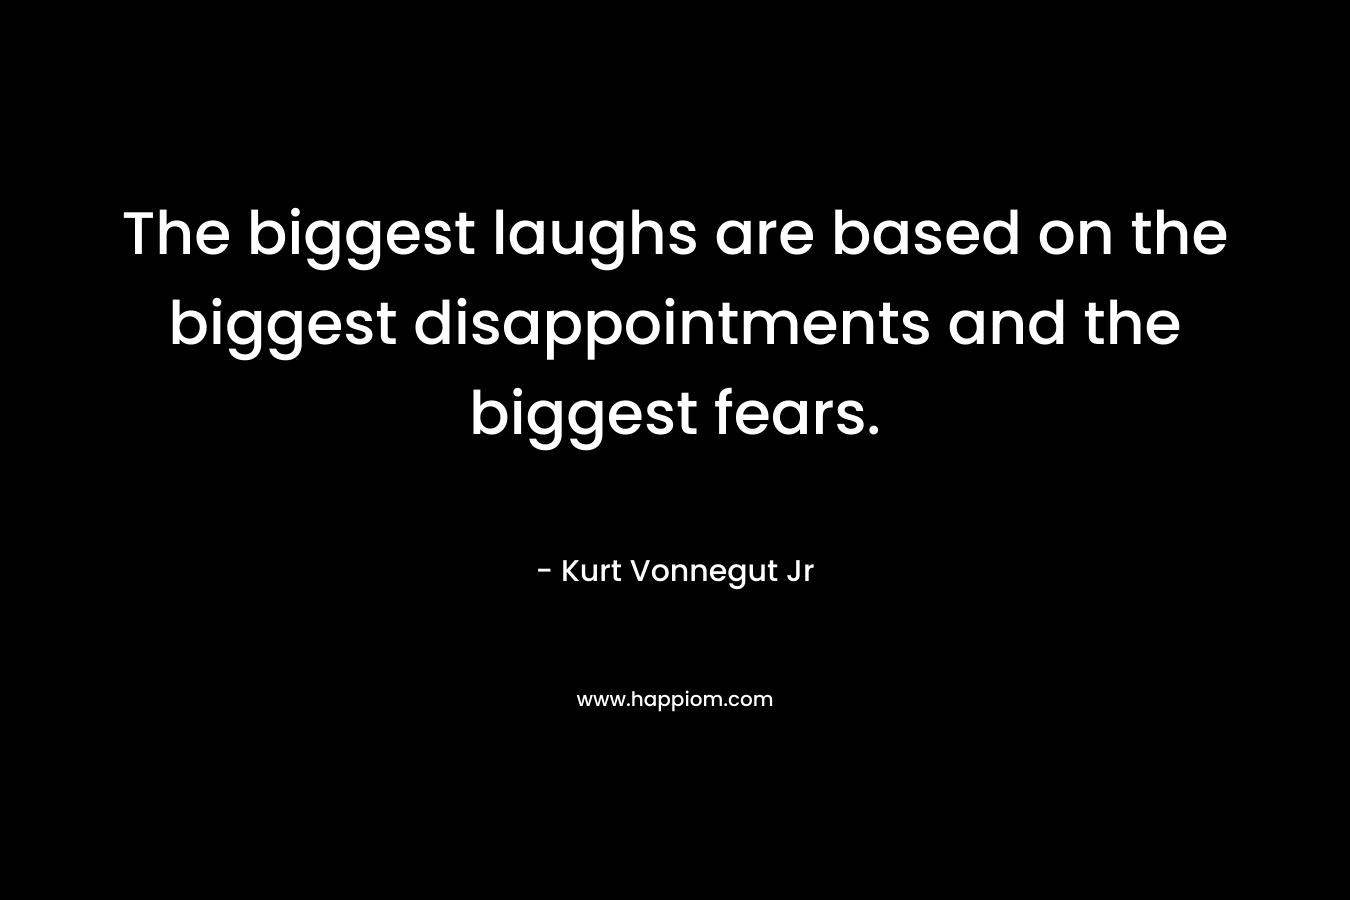 The biggest laughs are based on the biggest disappointments and the biggest fears.